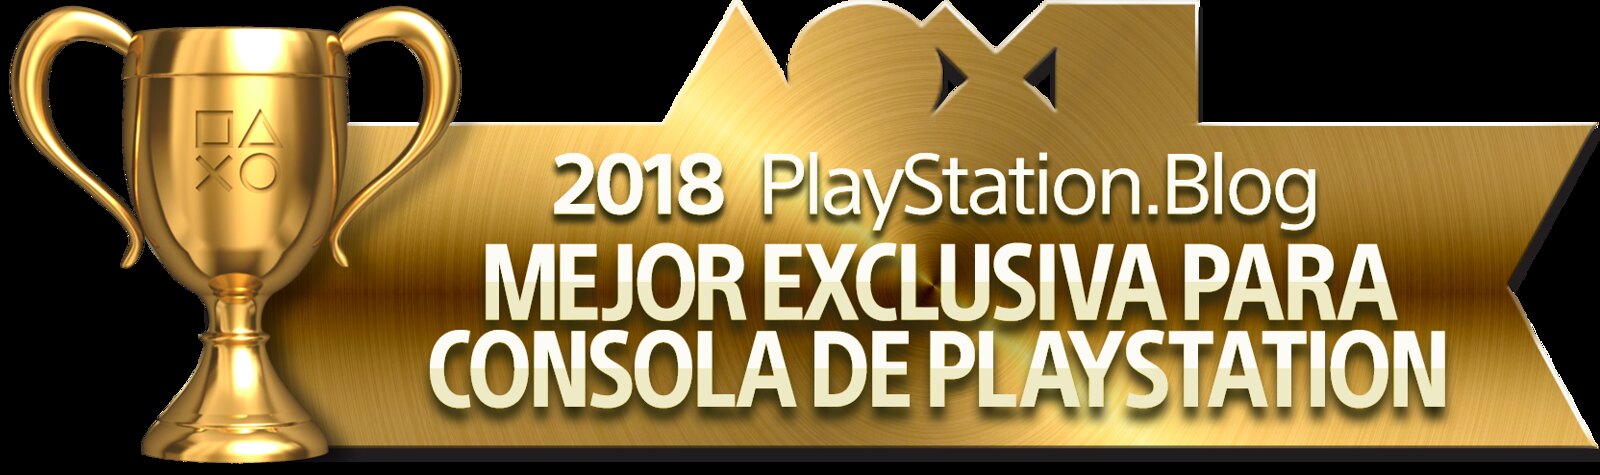 Best PlayStation Console Exclusive - Gold